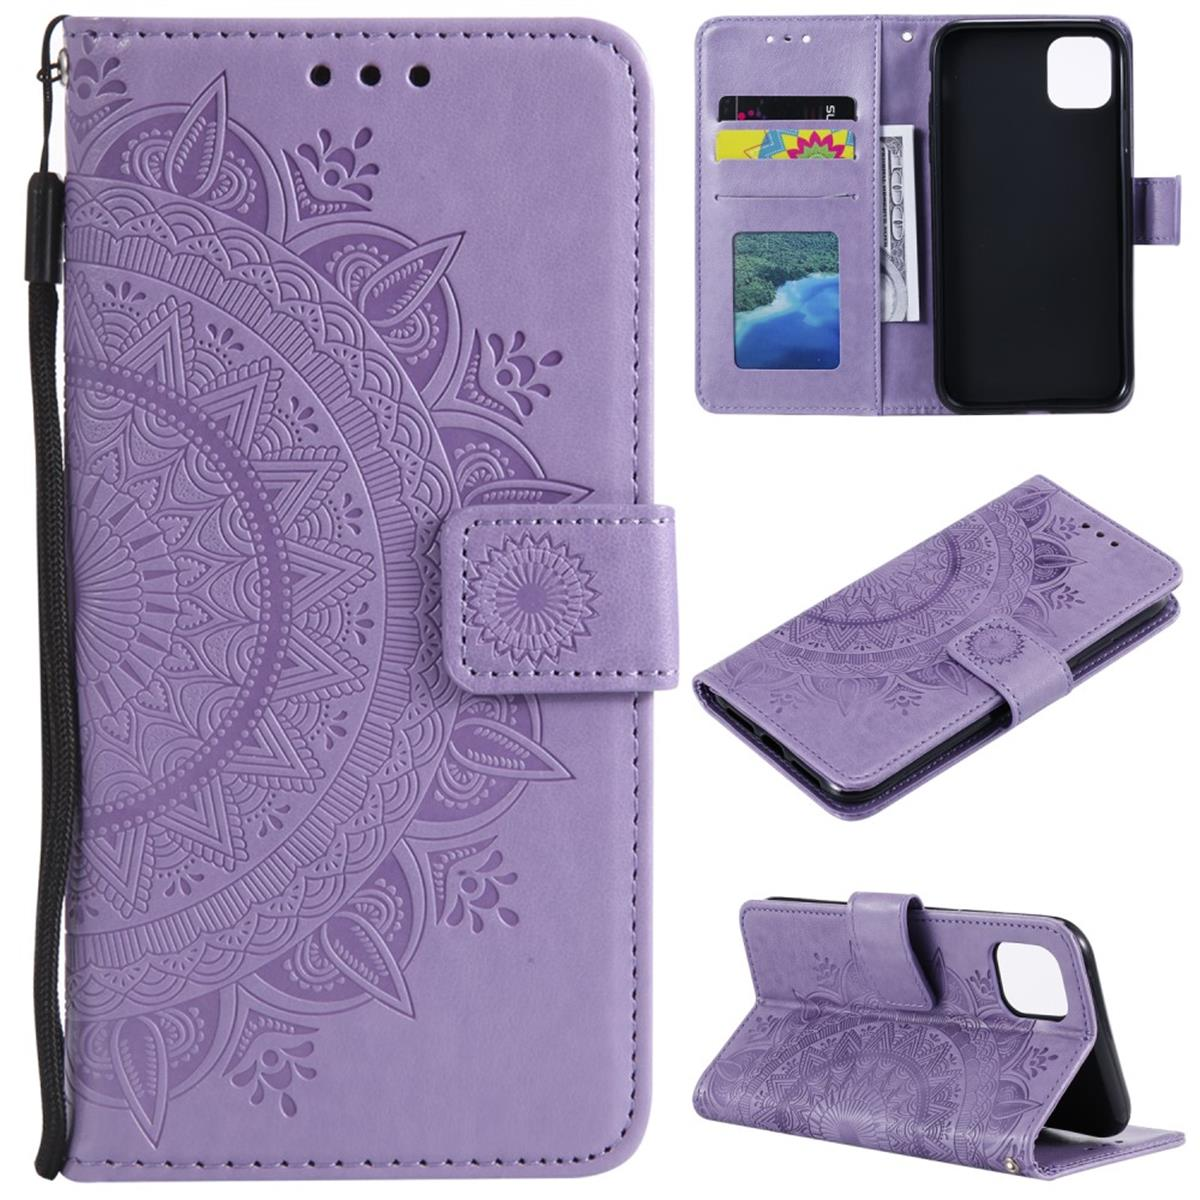 Pro Max, Lila mit Muster, Bookcover, iPhone COVERKINGZ Klapphülle Mandala 13 Apple,